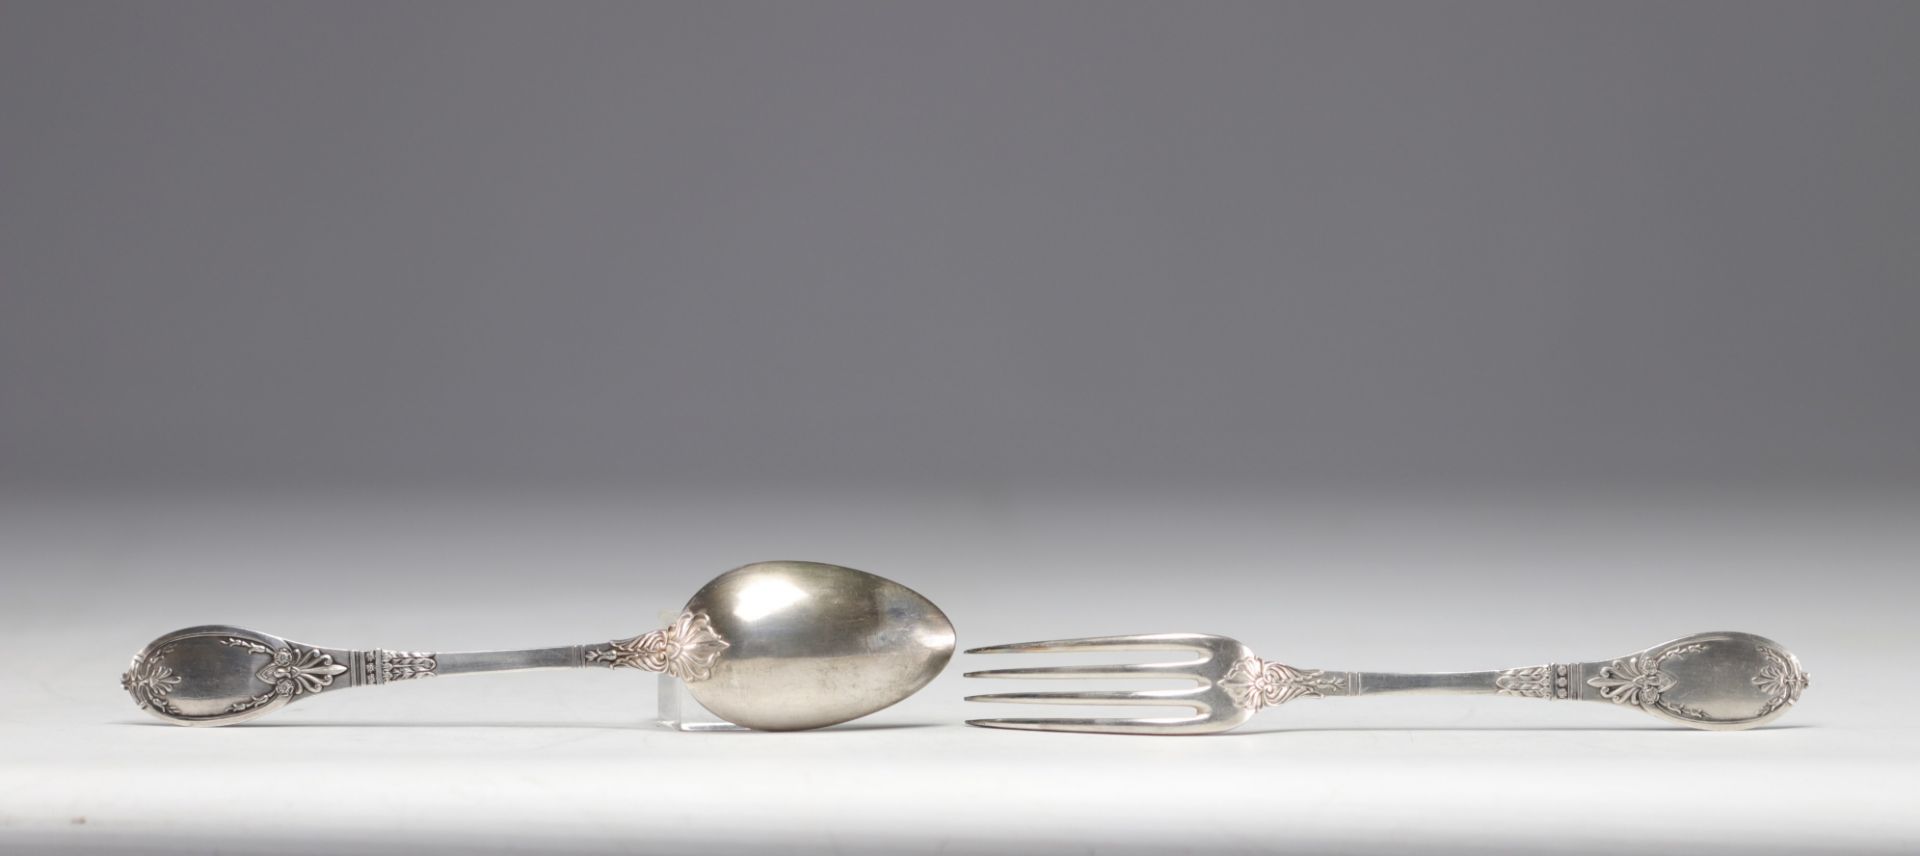 CAILAR BAYARD, Empire style boxed set of 24 silver plated cutlery, forks and spoons. - Image 2 of 4